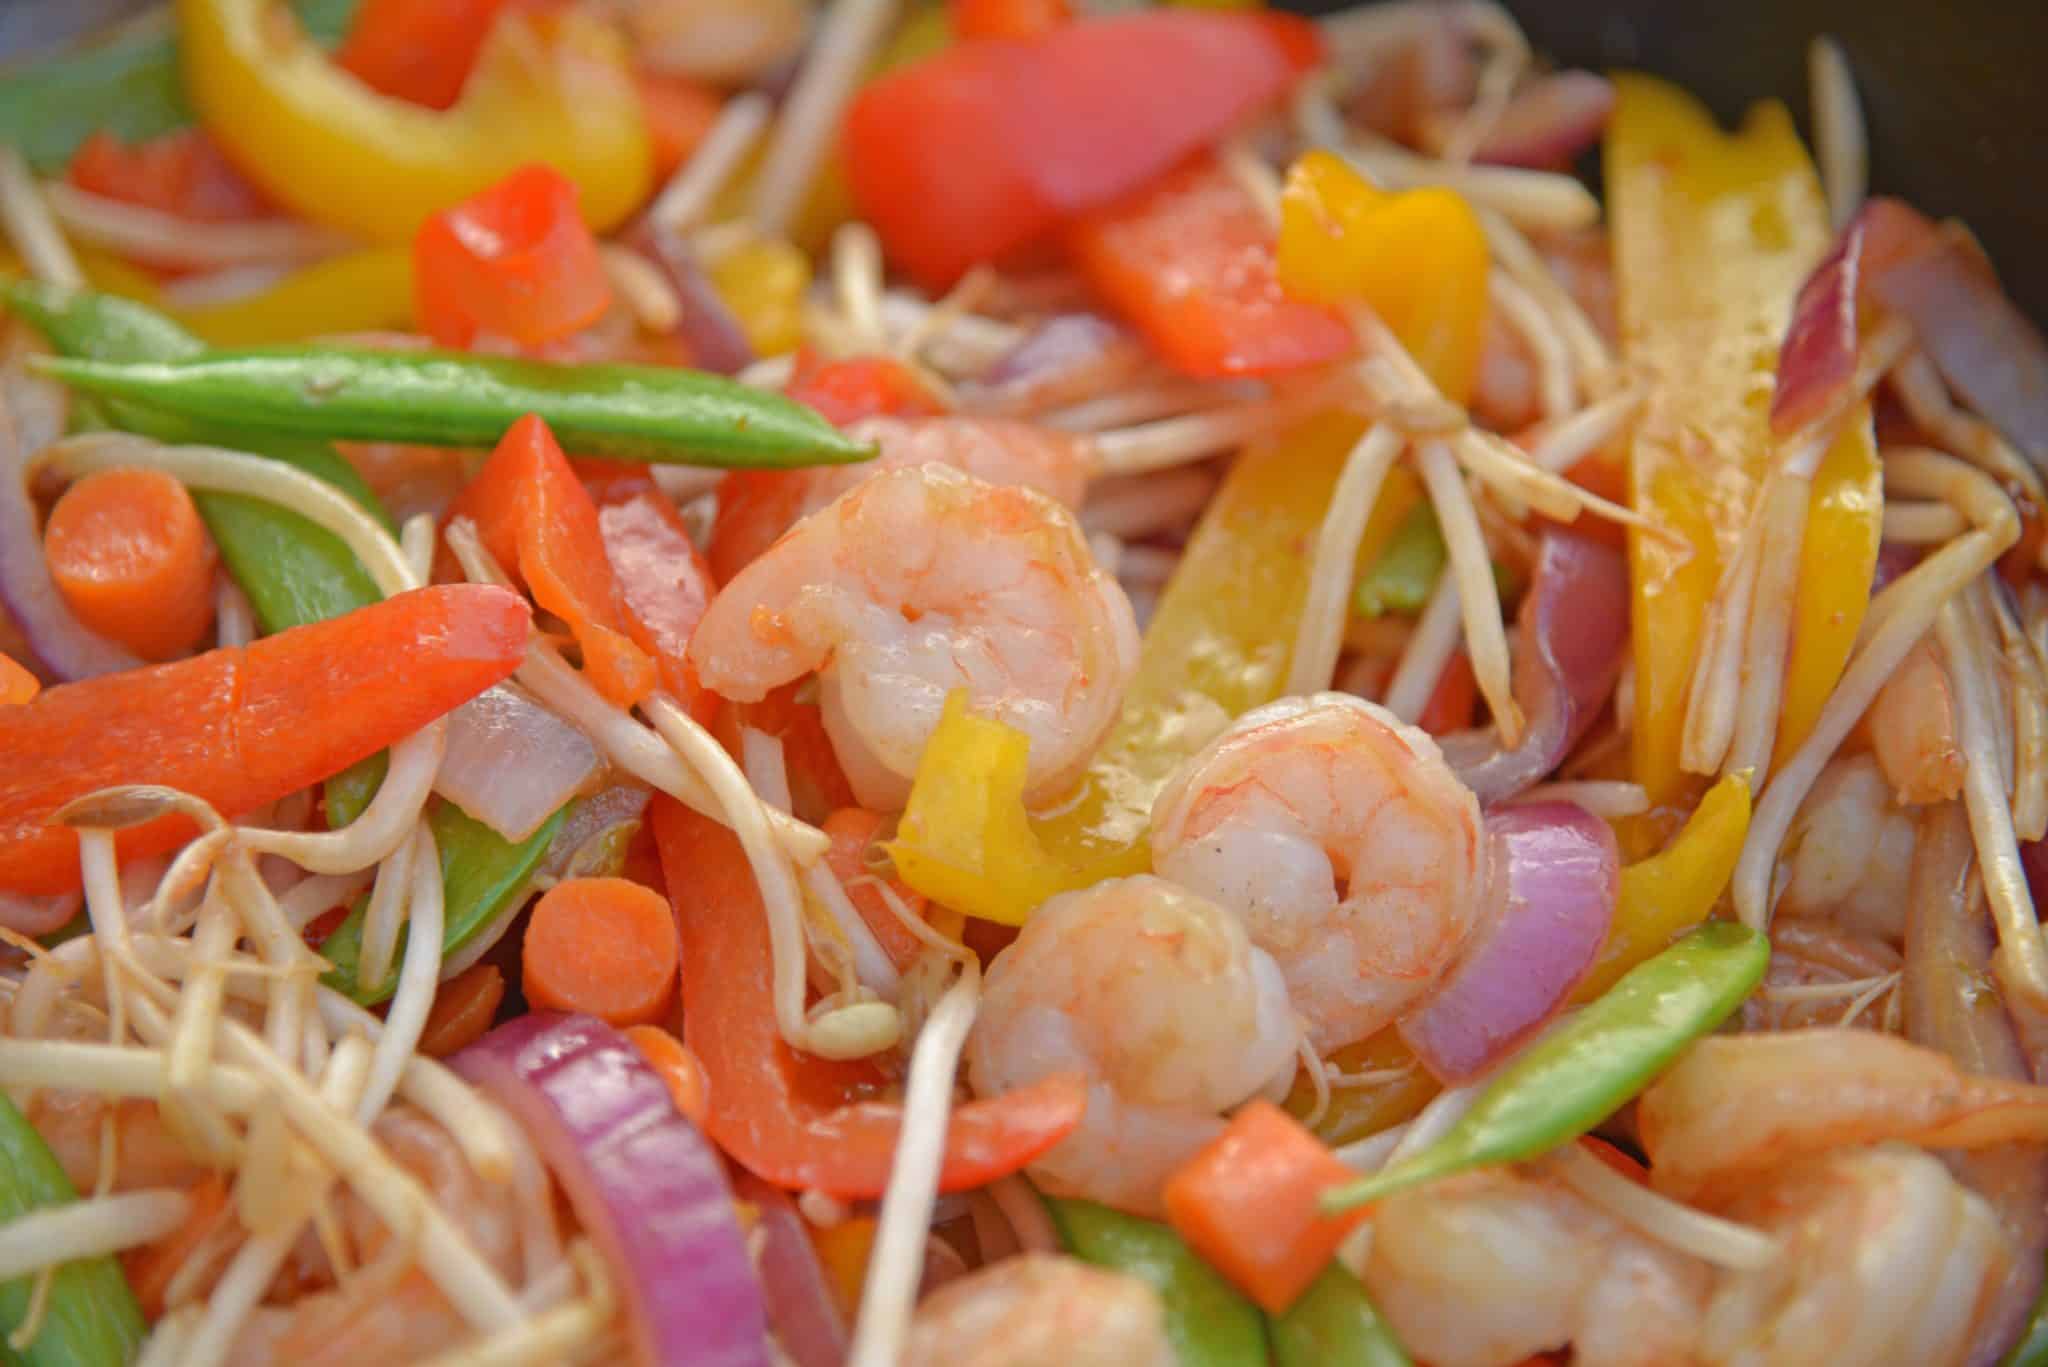 Skip the takeout and make this easy Teriyaki Shrimp Stir Fry instead! This Shrimp Stir Fry is an easy weeknight meal that the whole family will love! Best served with fried rice or noodles and packed full of veggies, this healthy recipe is sure to be a hit! #shrimpstirfry #teriyakirecipes #recipesthatuseteriyakisauce #teriyakishrimpstirfry #savoryexperiments 